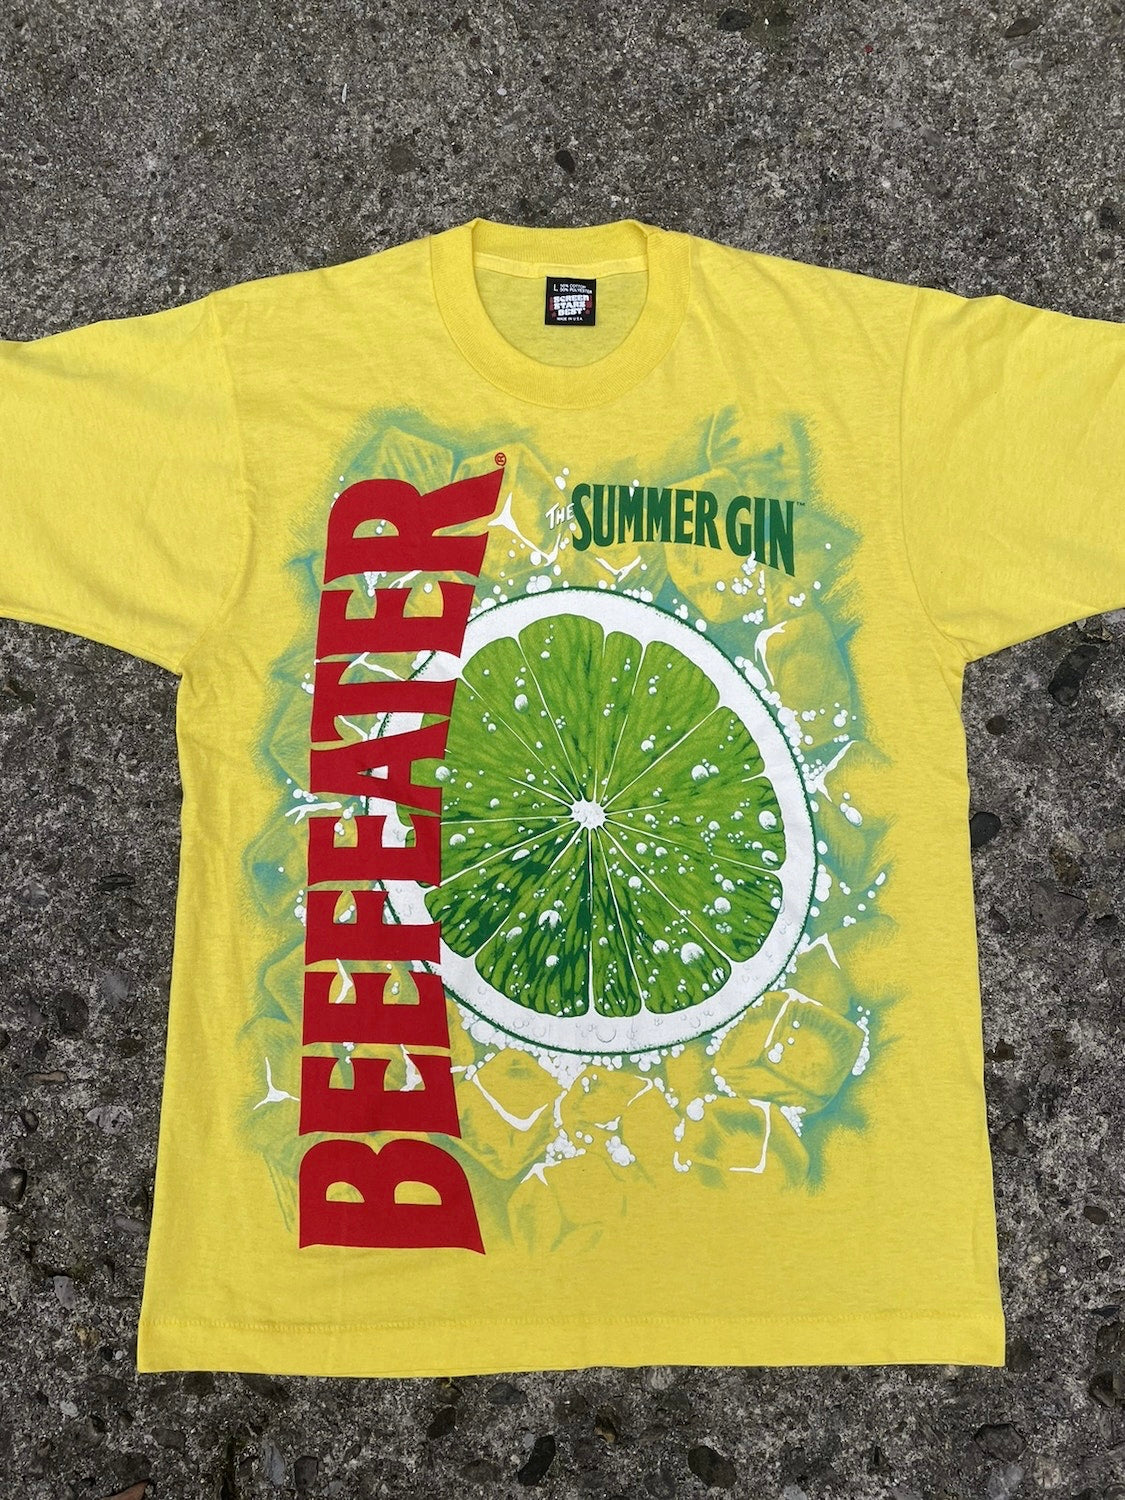 1990’s Beefeater Summer Gin Graphic T-Shirt - L